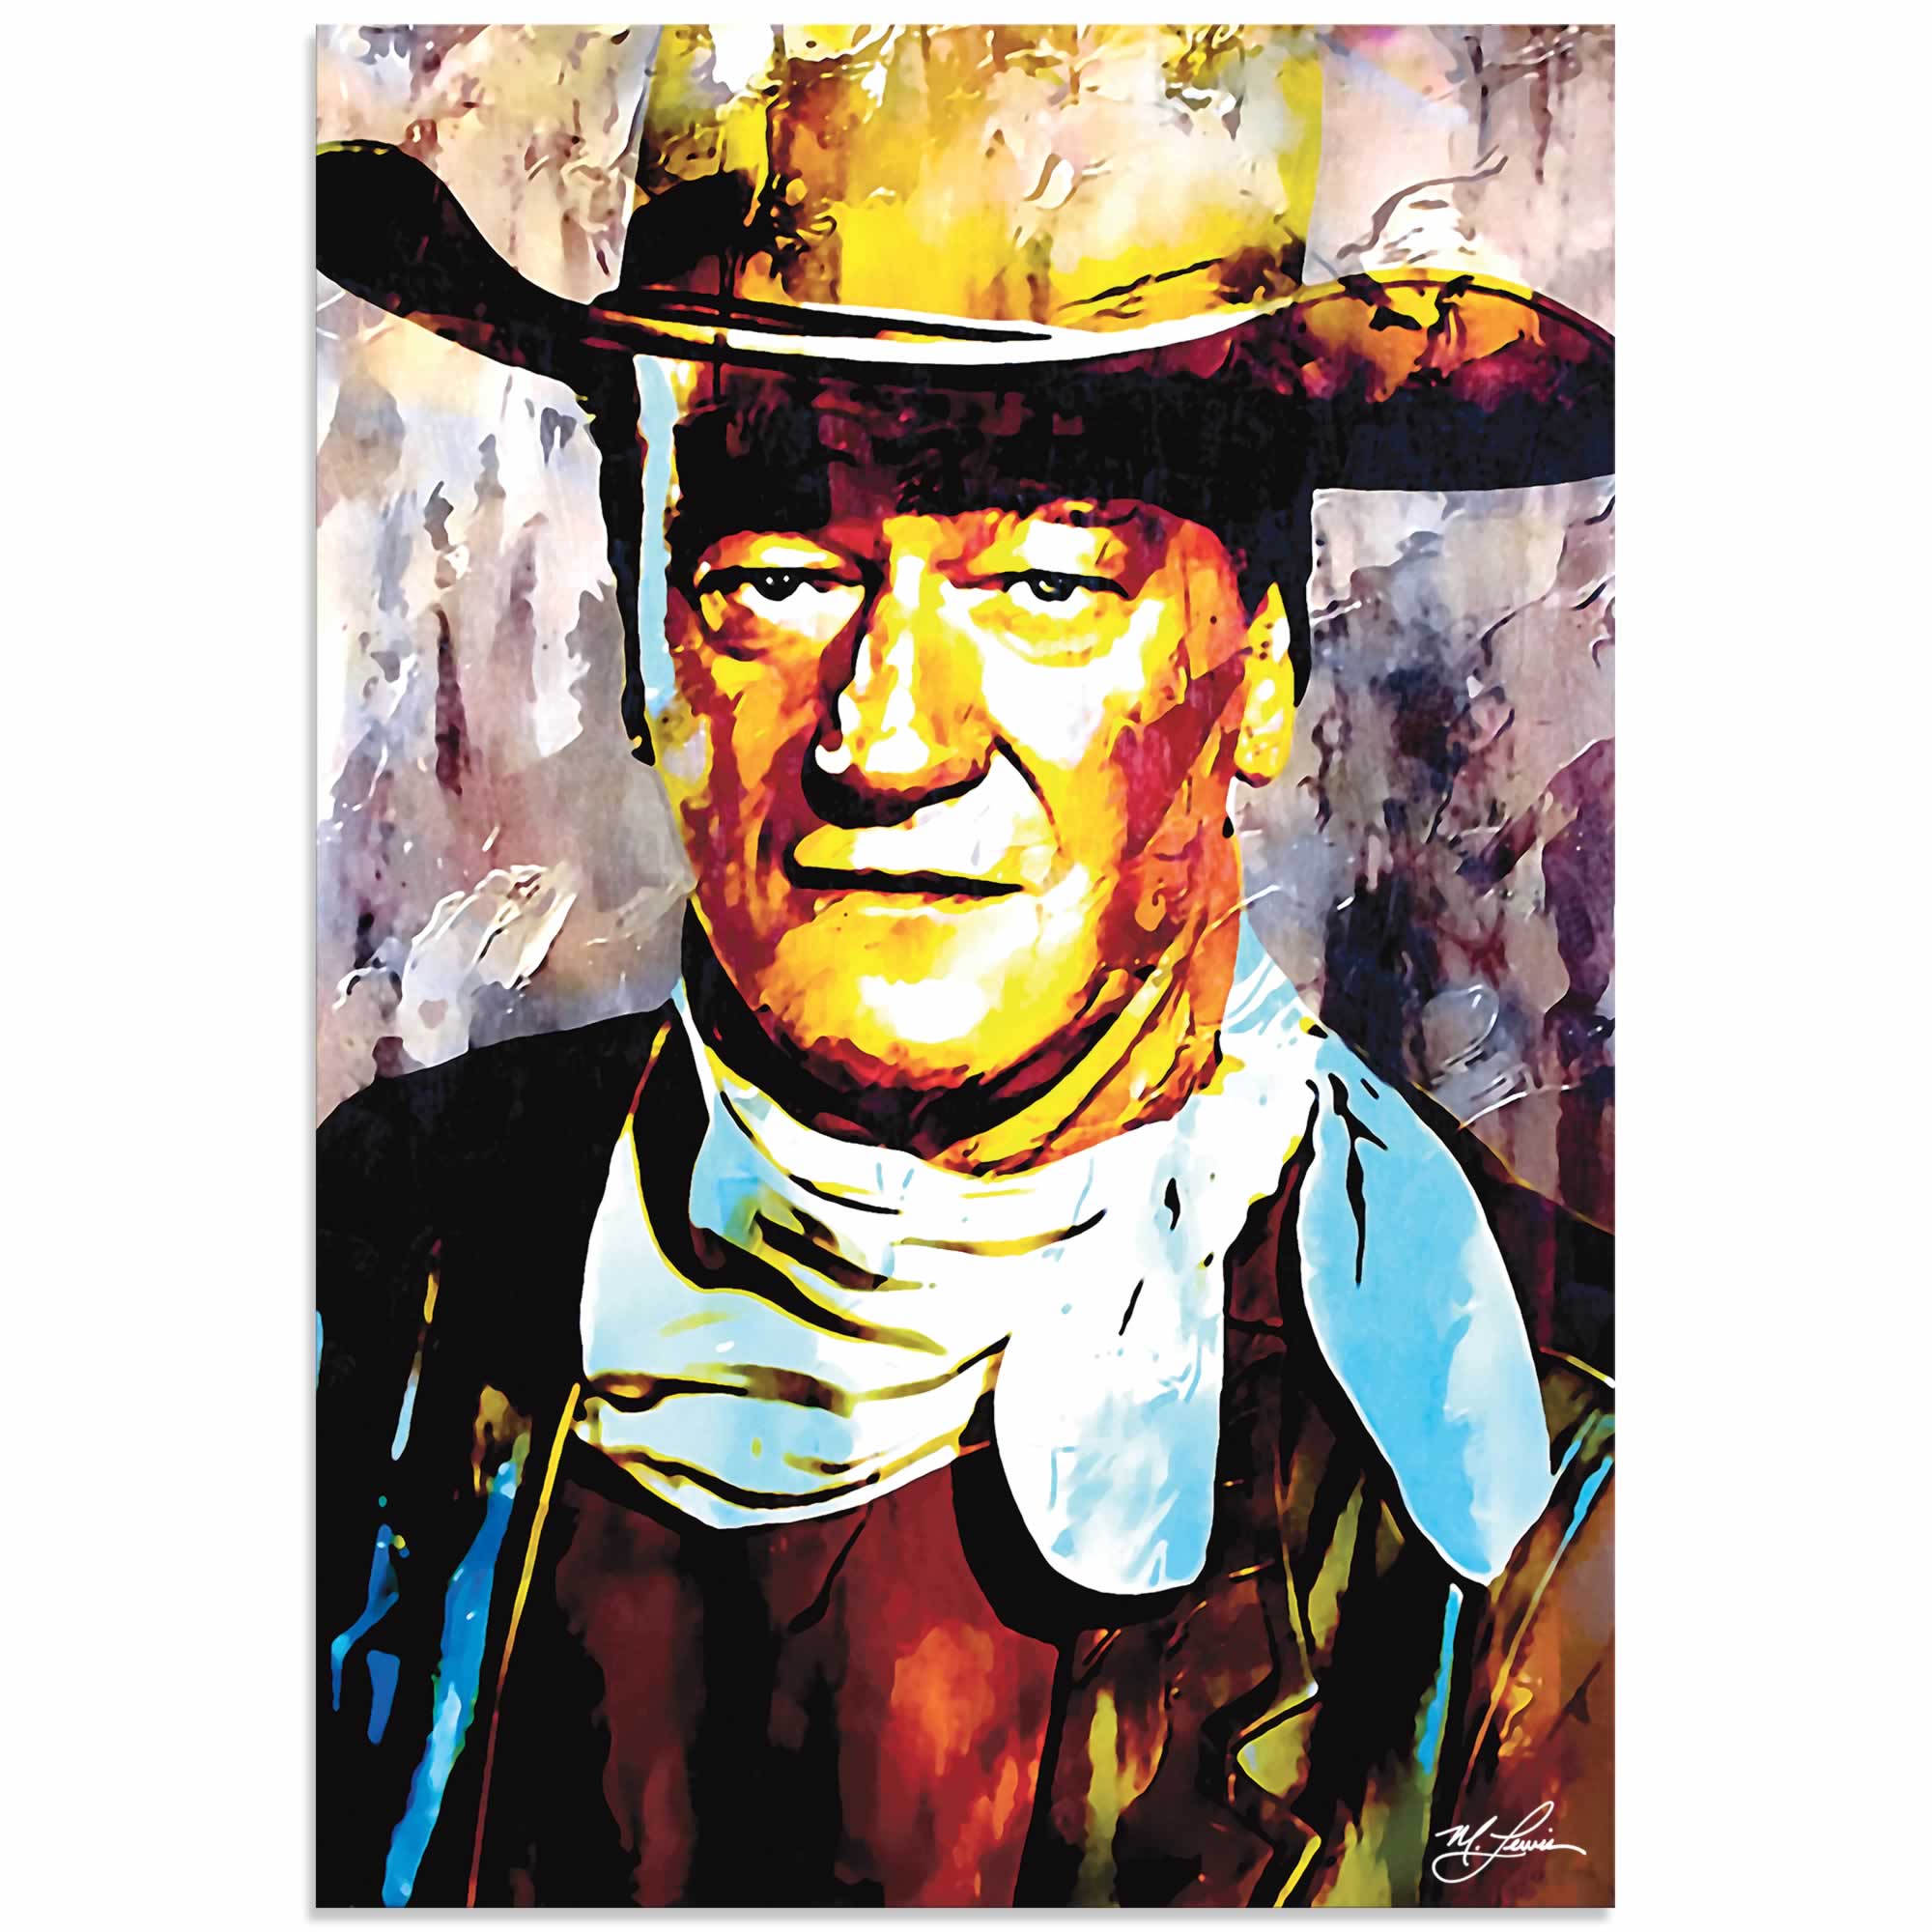 John Wayne Gallant Duke | Pop Art Painting by Mark Lewis, Signed & Numbered Limited Edition 